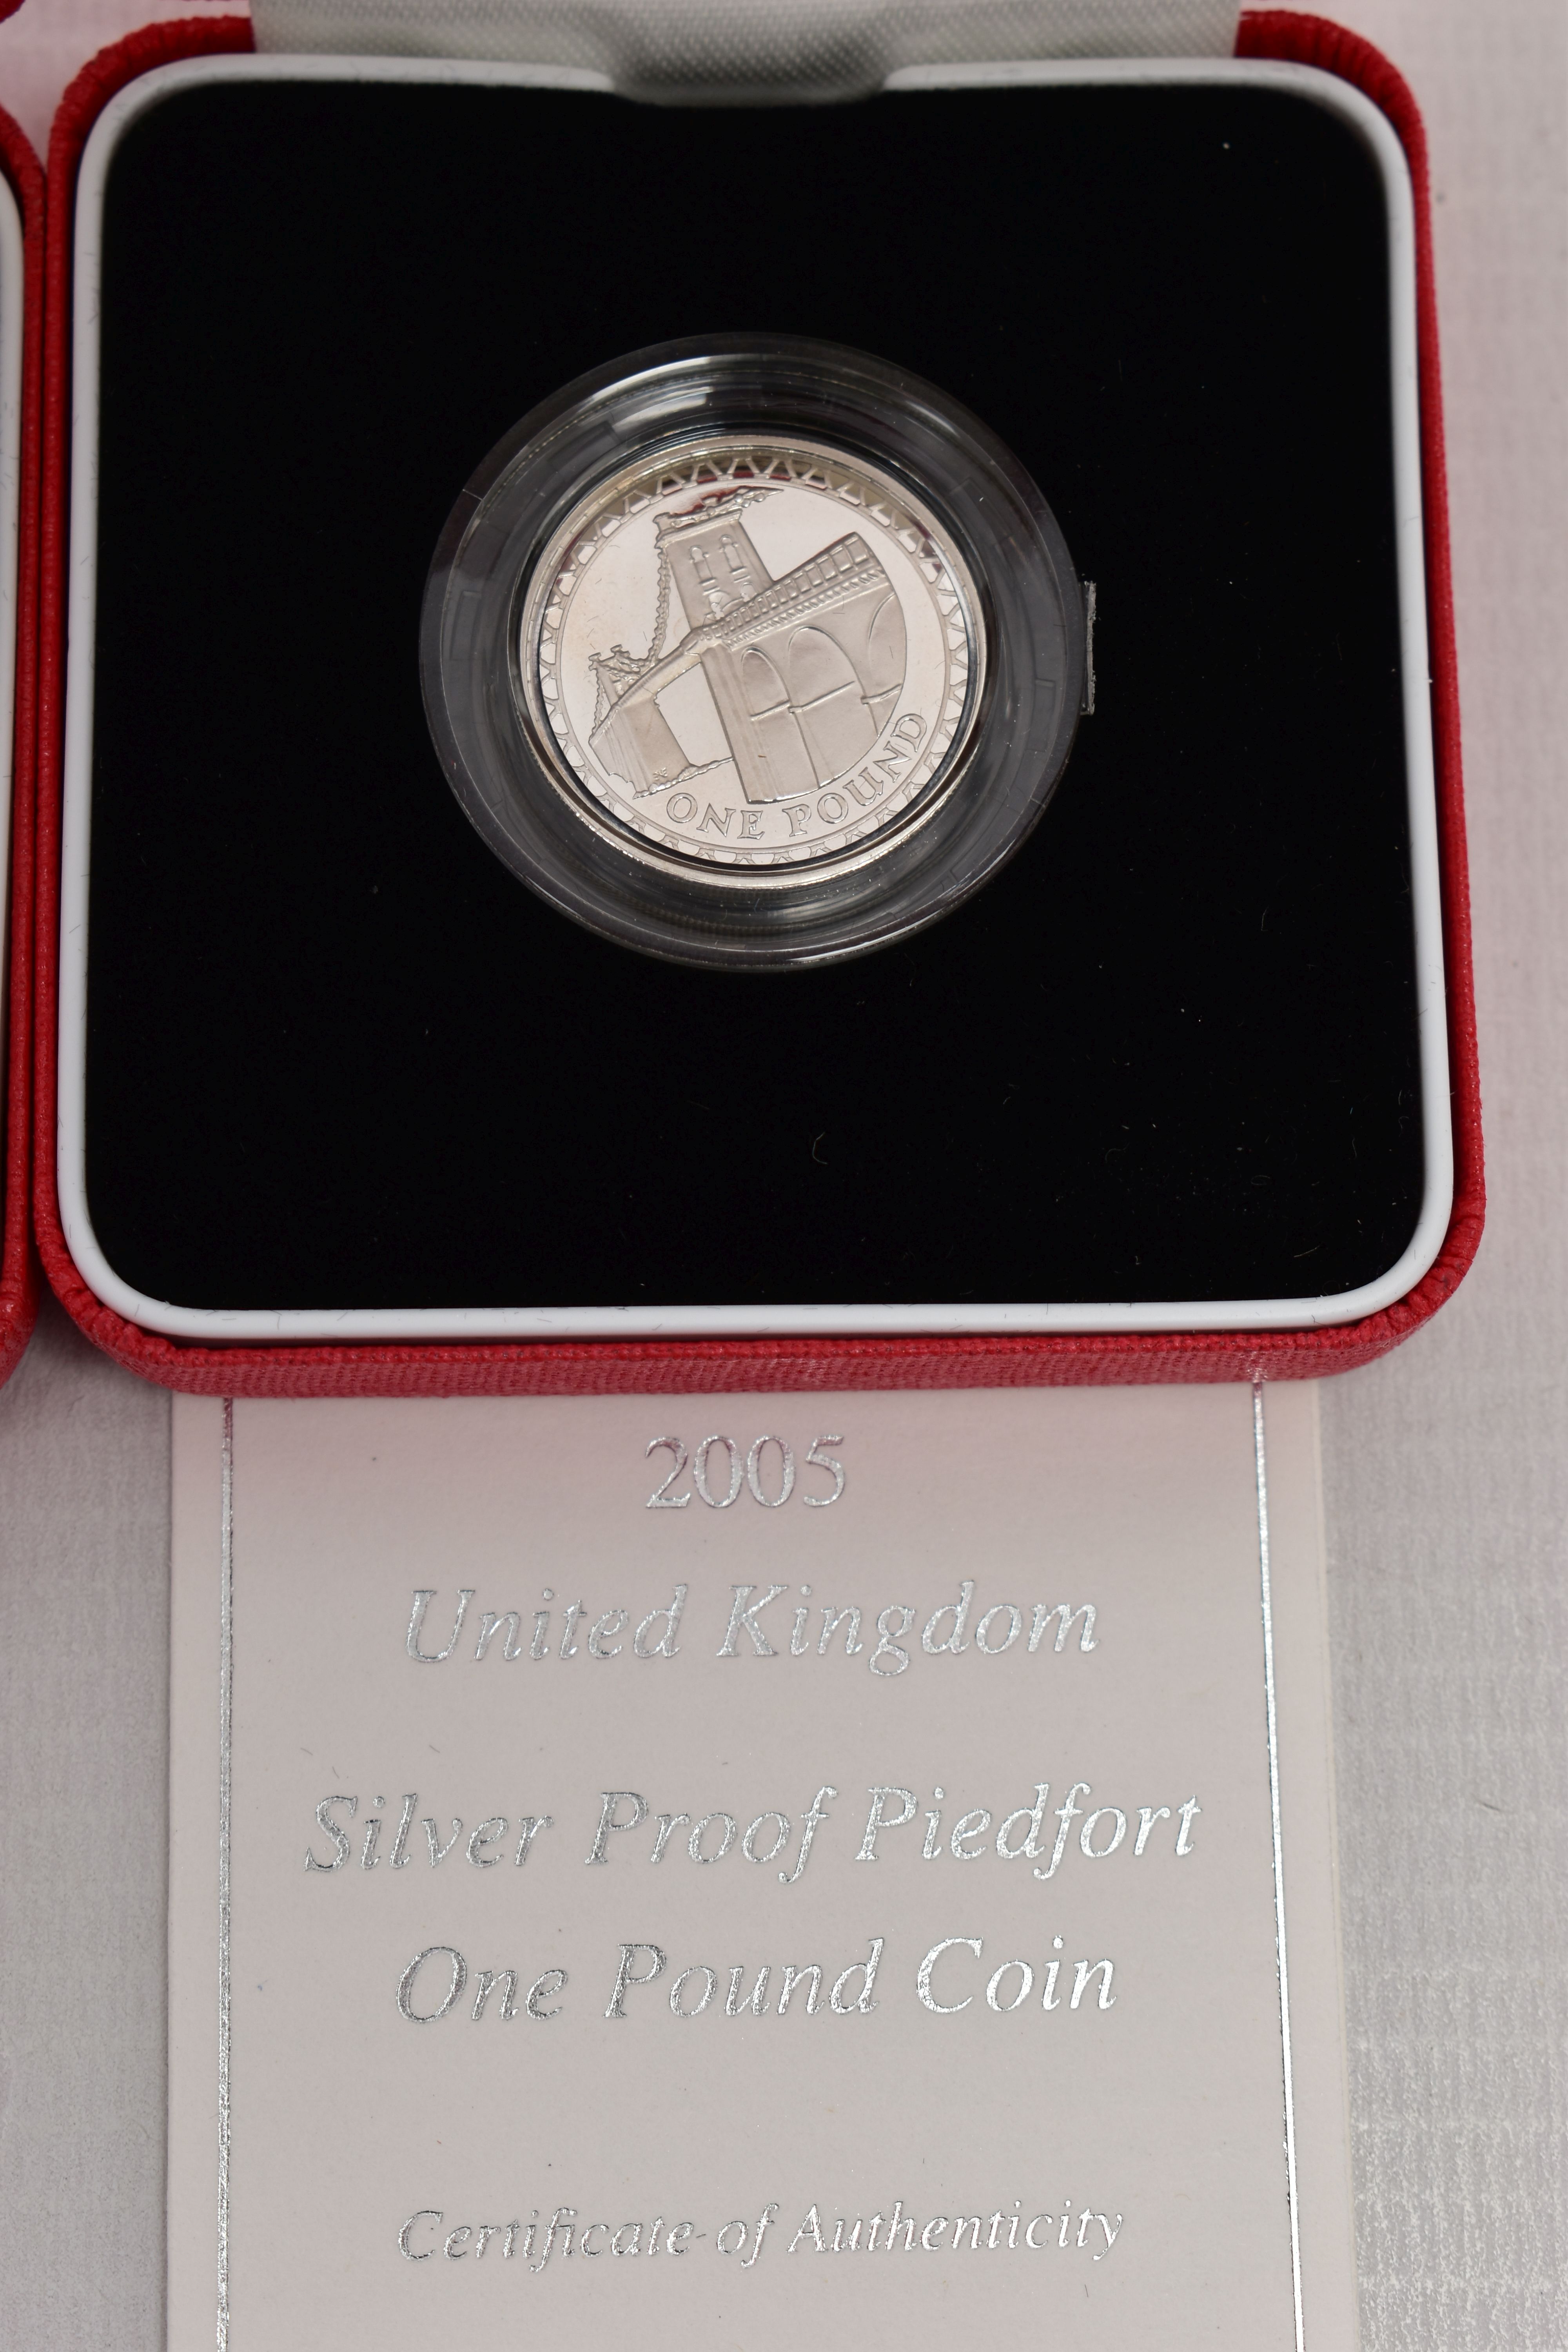 ROYAL MINT SILVER PIEDFORT PROOF ONE POUND COINS, 1999,2003,2005 all boxed with certificates - Image 3 of 3